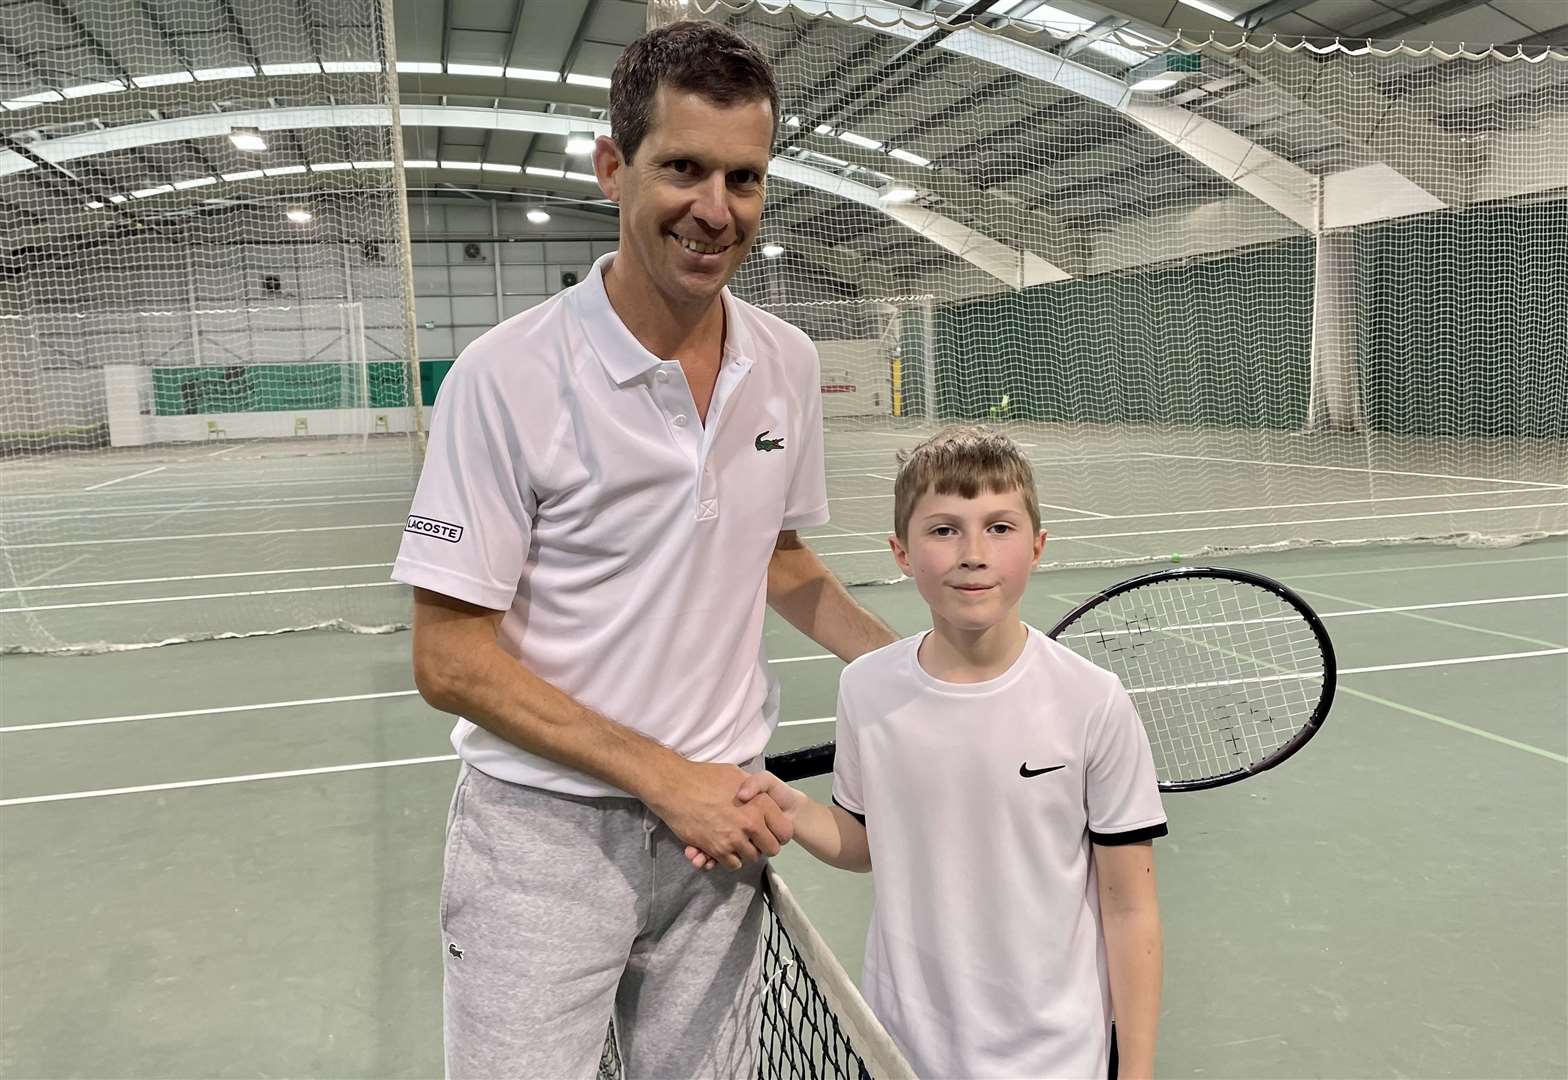 Sam Dennison from Kingsdown described feeling "exhausted" after his lesson with Tim Henman